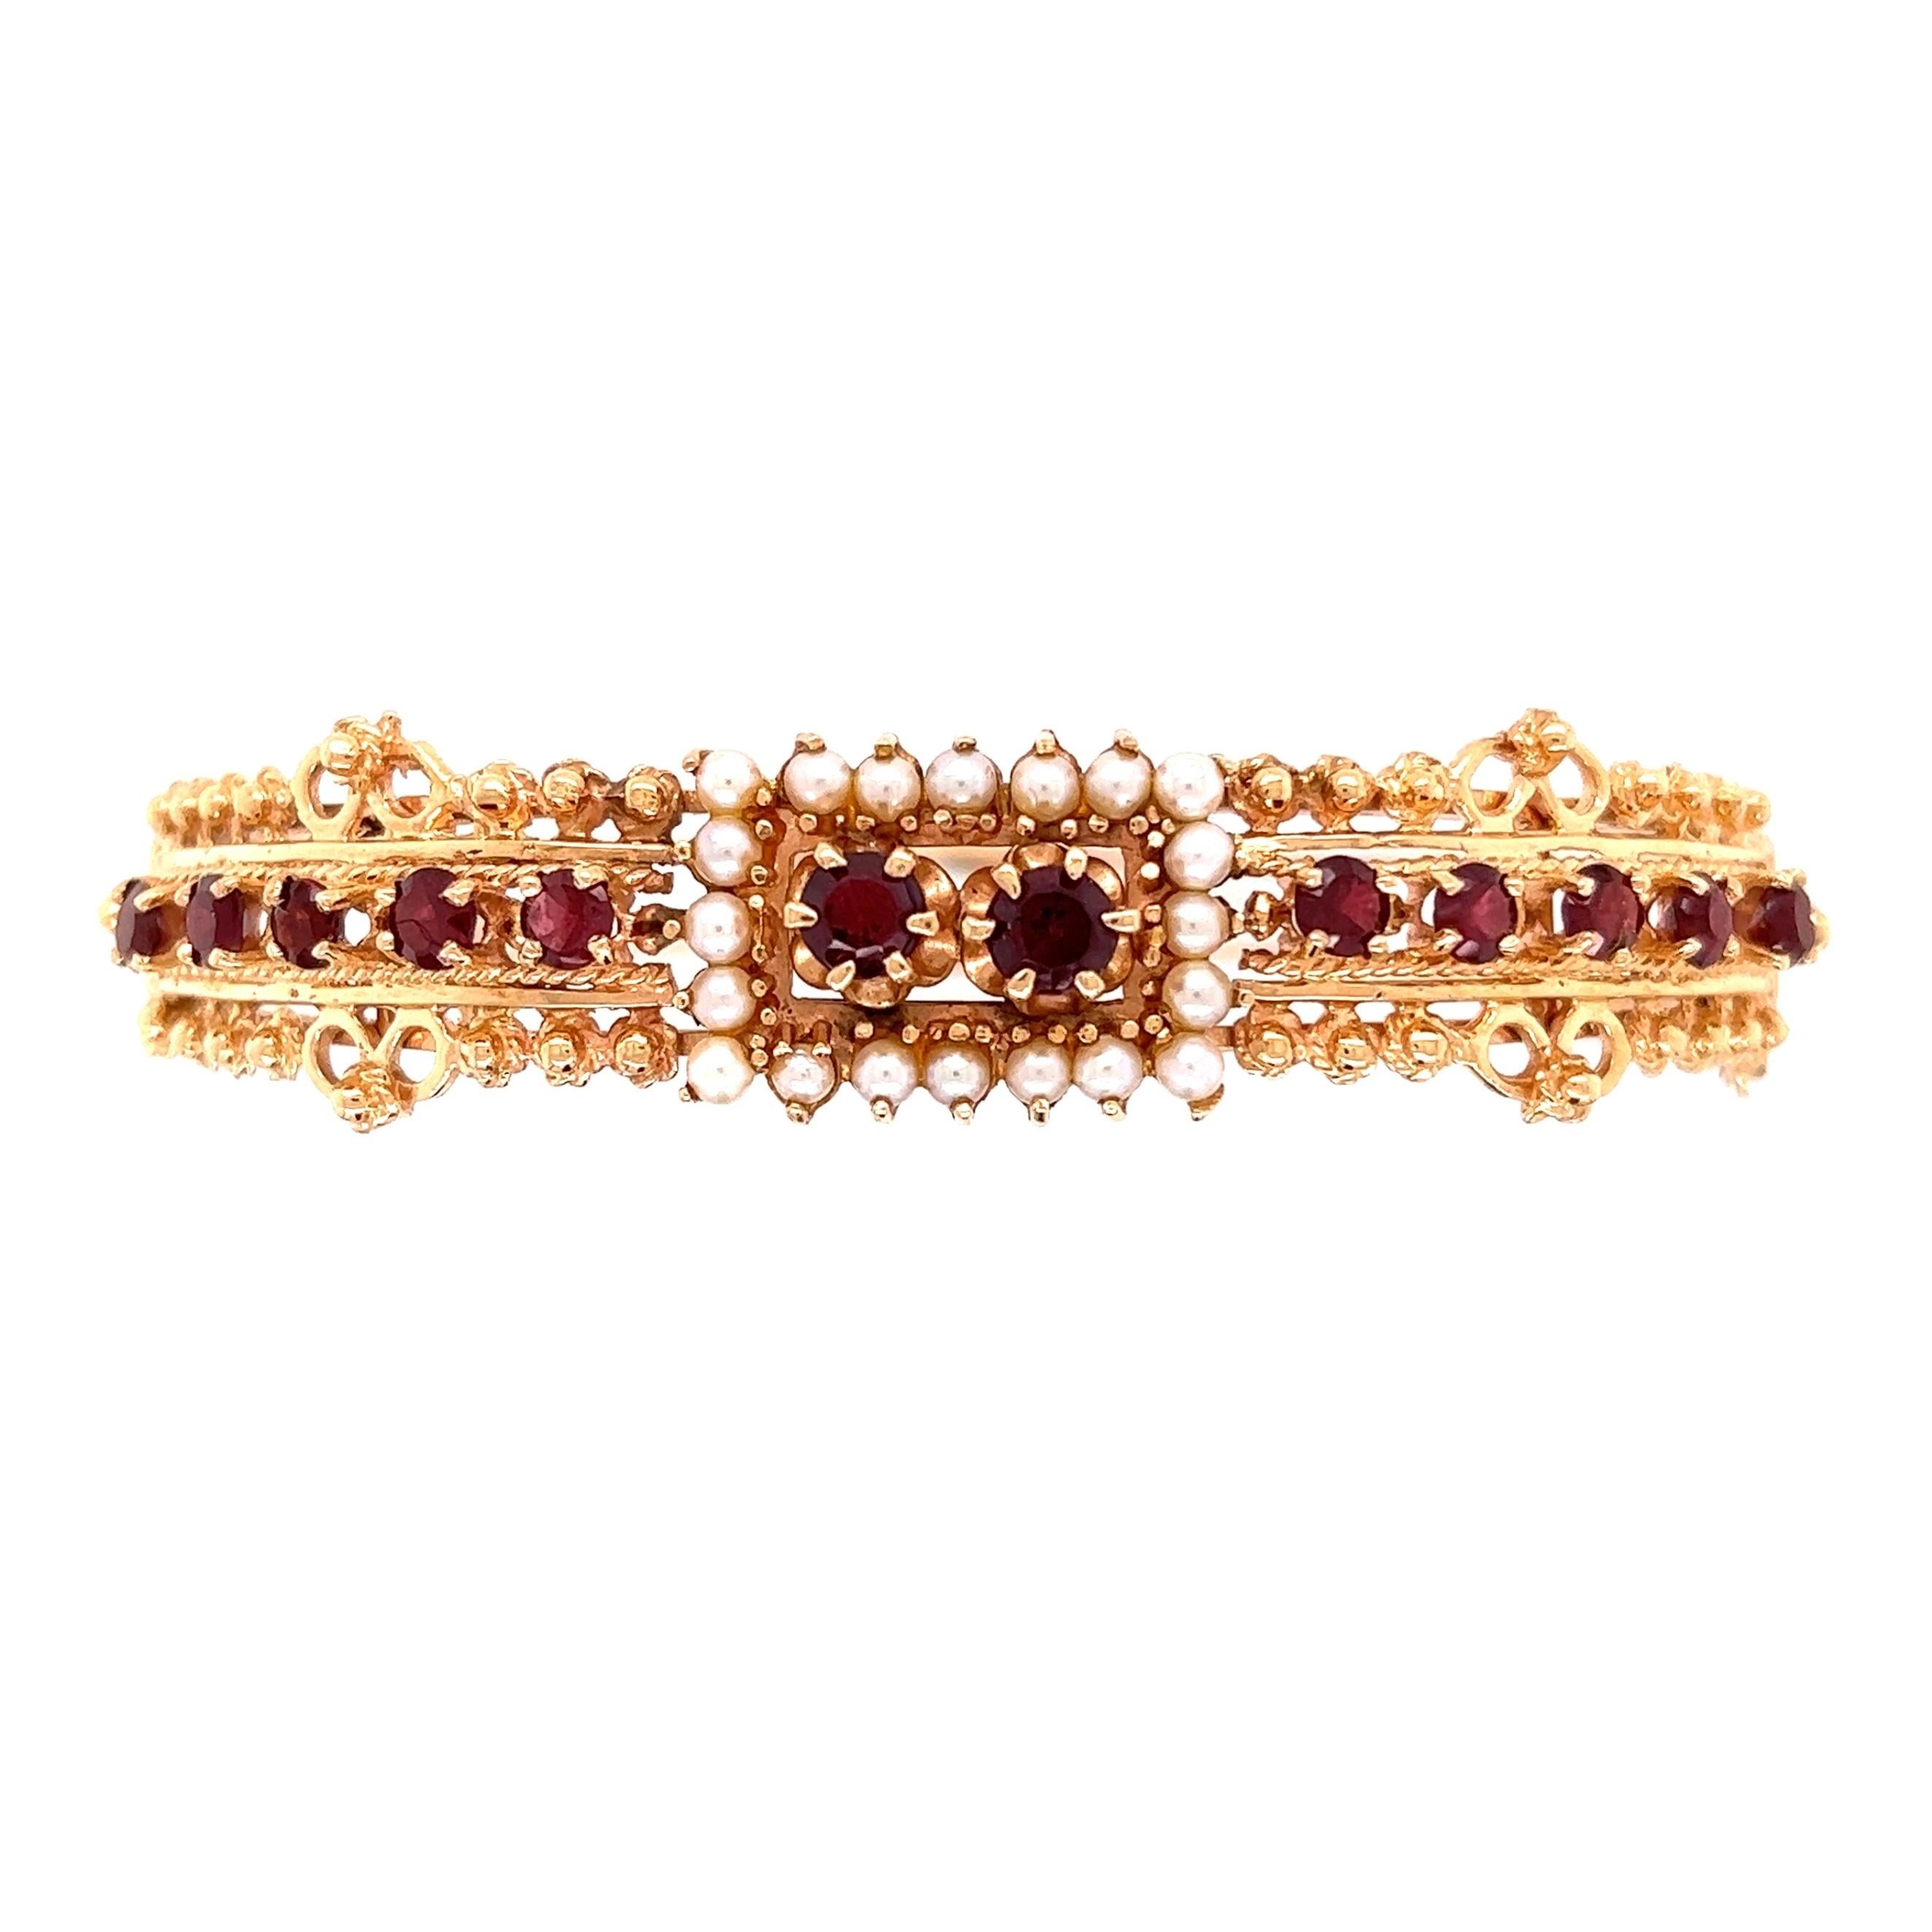 Women's Garnet and Seed Pearl Victorian Revival Gold Cuff Bangle Bracelet For Sale